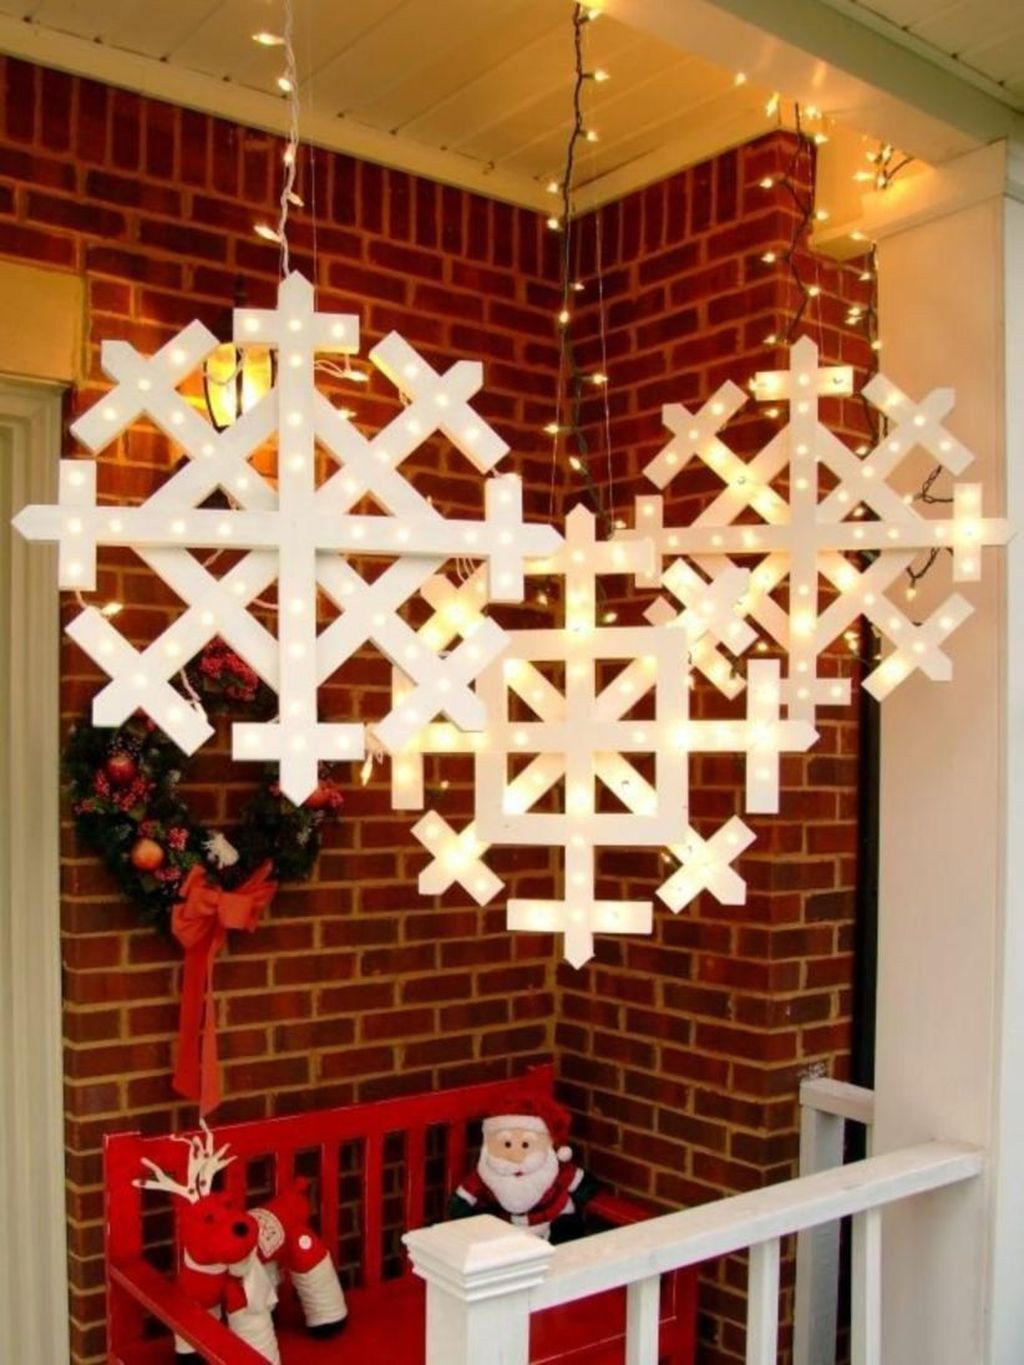 Excellent Outdoor Christmas Decorations Ideas22